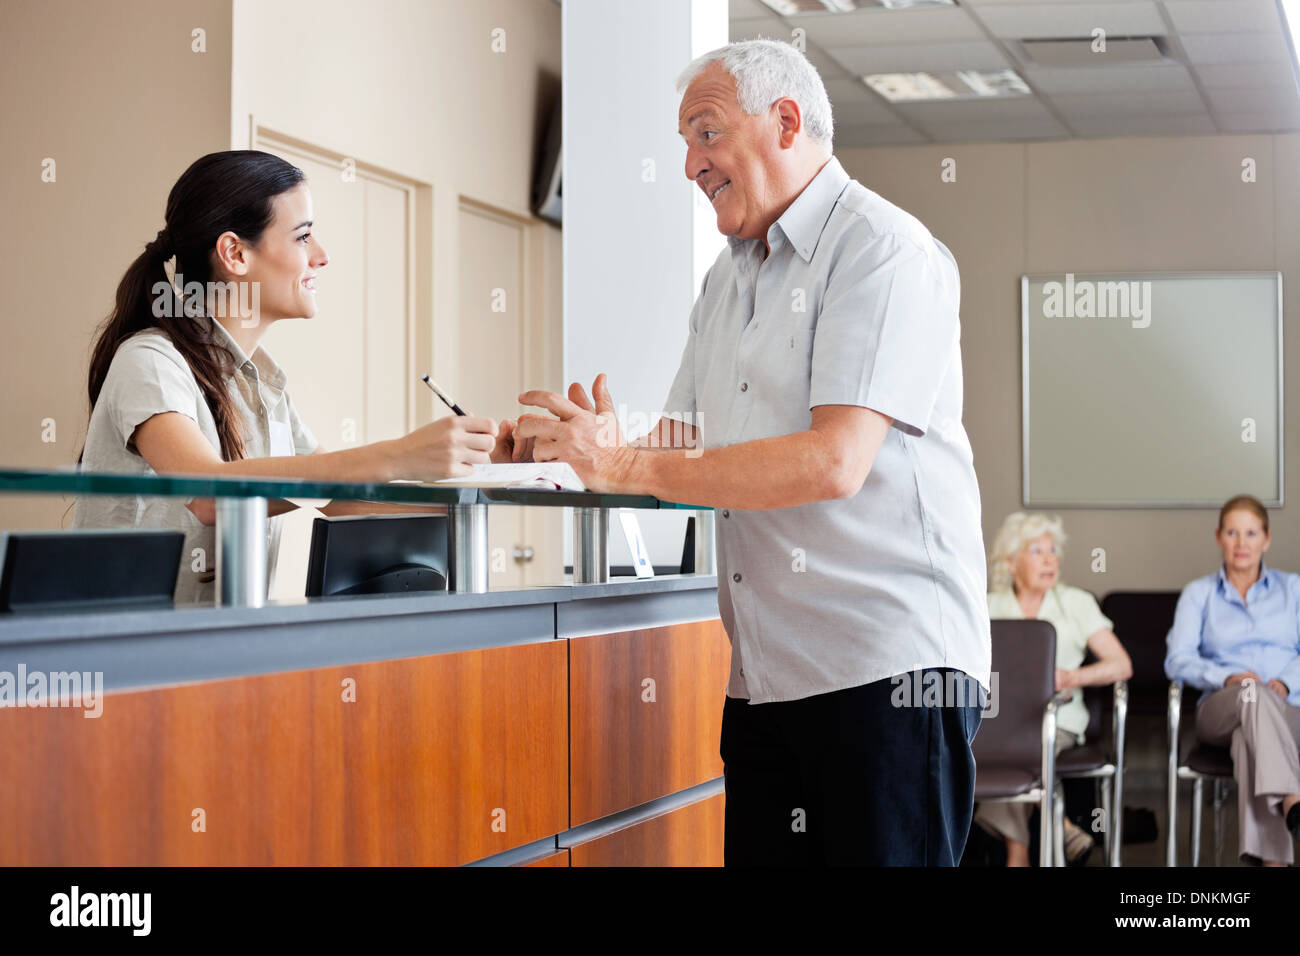 Man Communicating With Female Receptionist Stock Photo